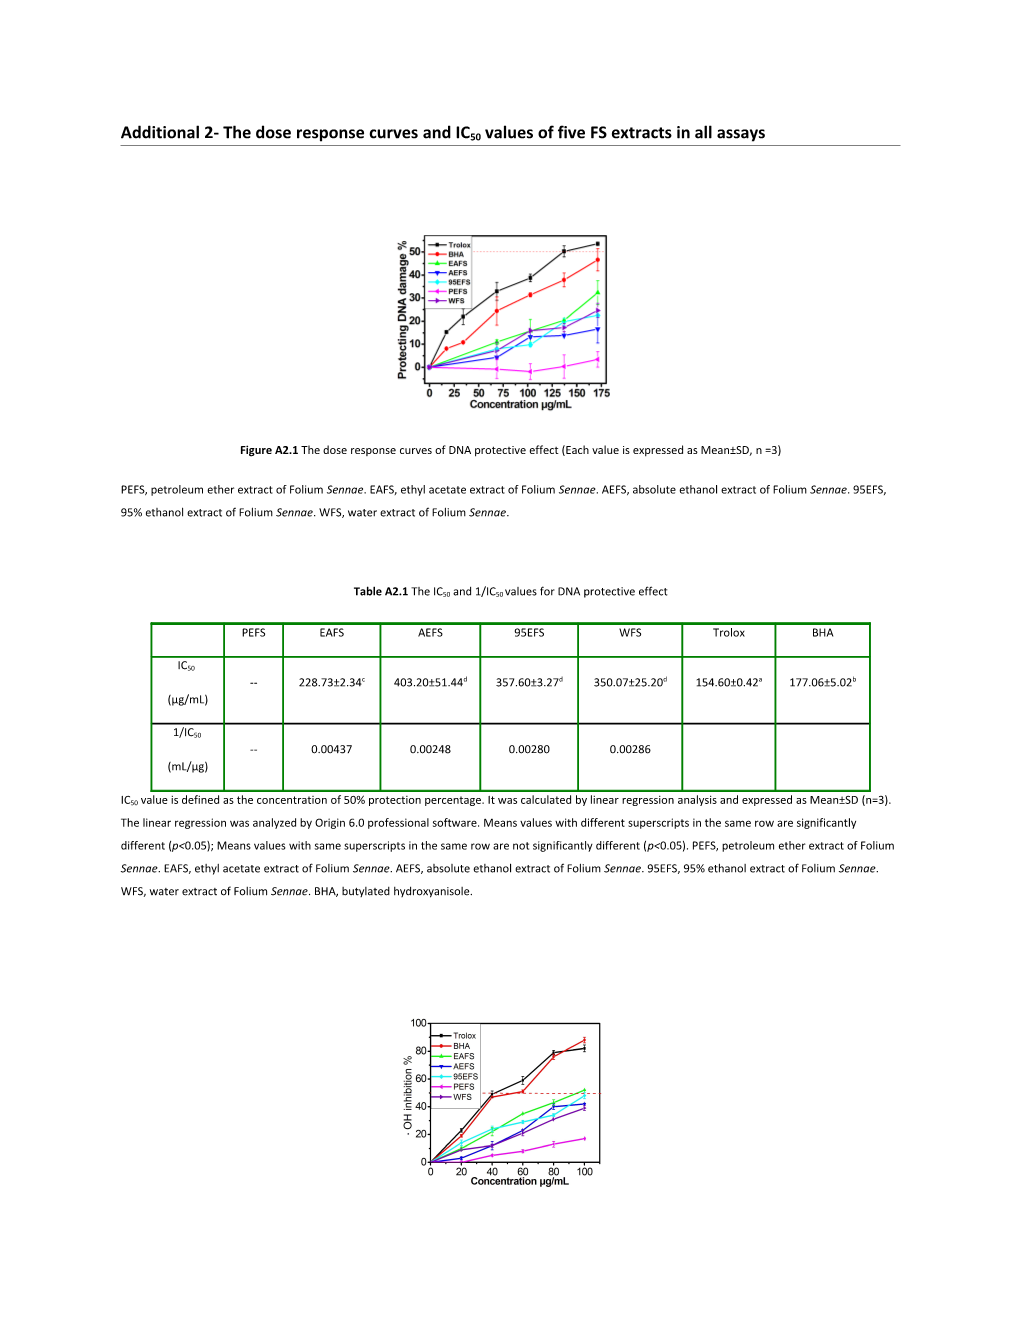 Additional 2- the Dose Response Curves and IC50 Values of Five FS Extracts in All Assays